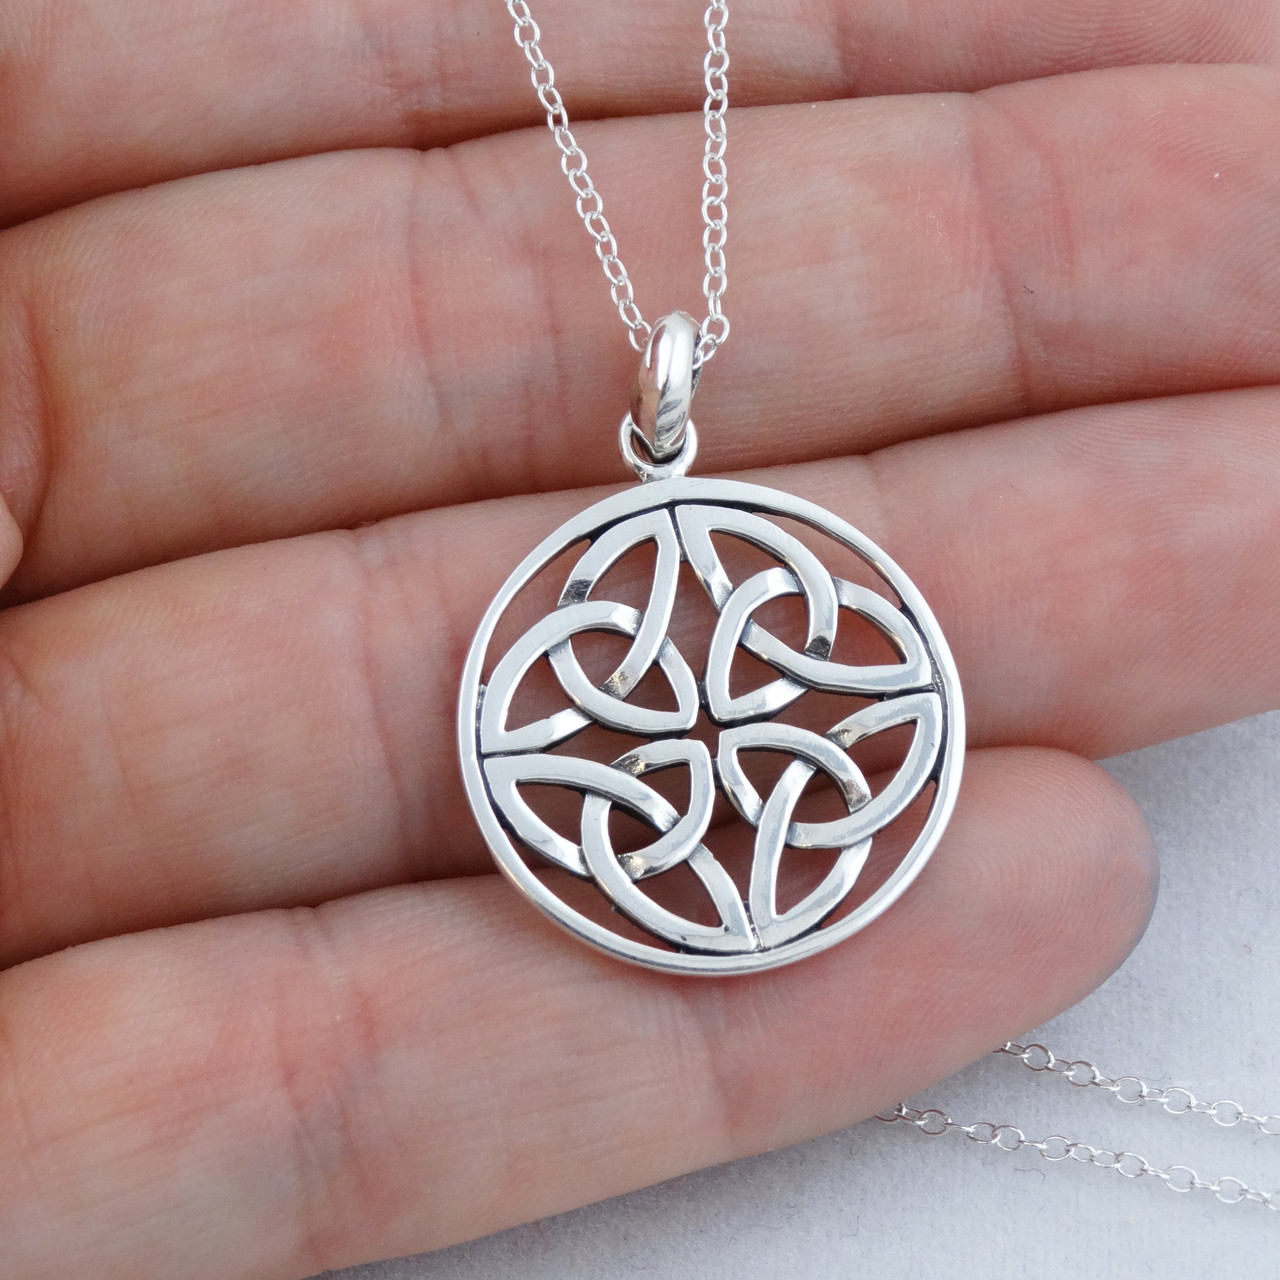 Mens Sterling Silver Trinity Knot Tie Tack - Online Celtic Jewelry